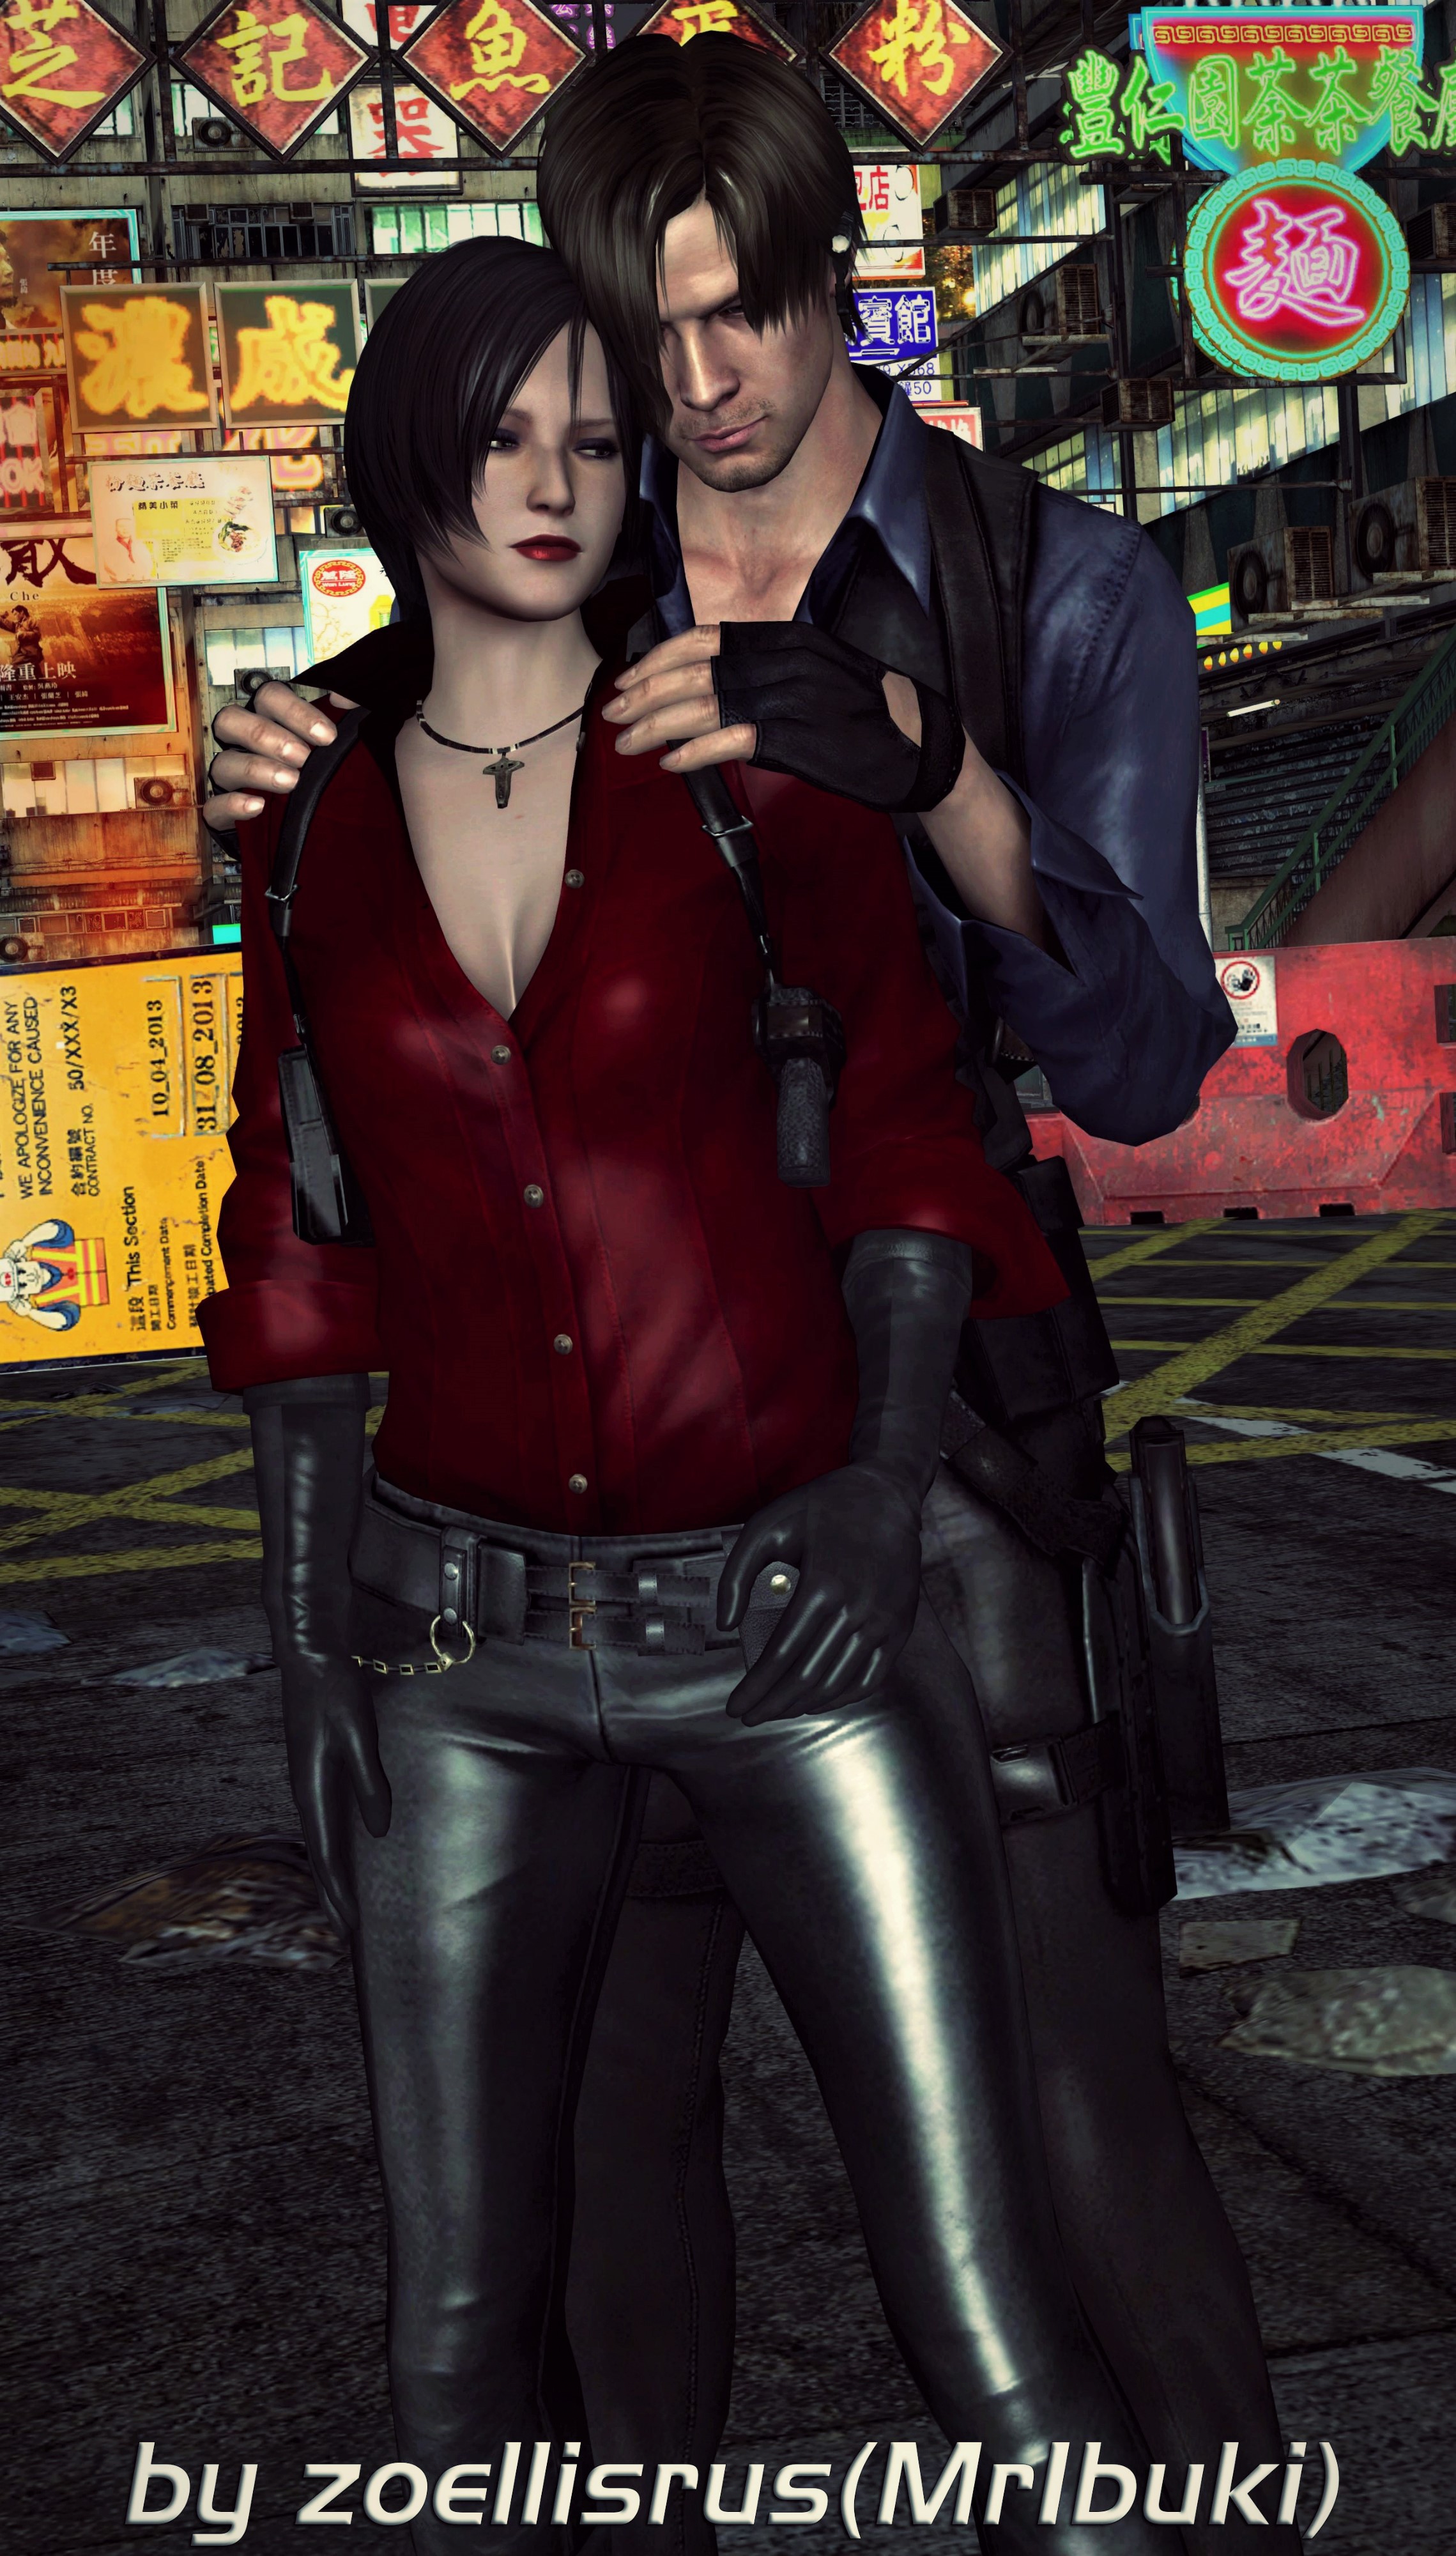 Leon and Ada (Resident Evil 6) by TheNeonSilver on Newgrounds